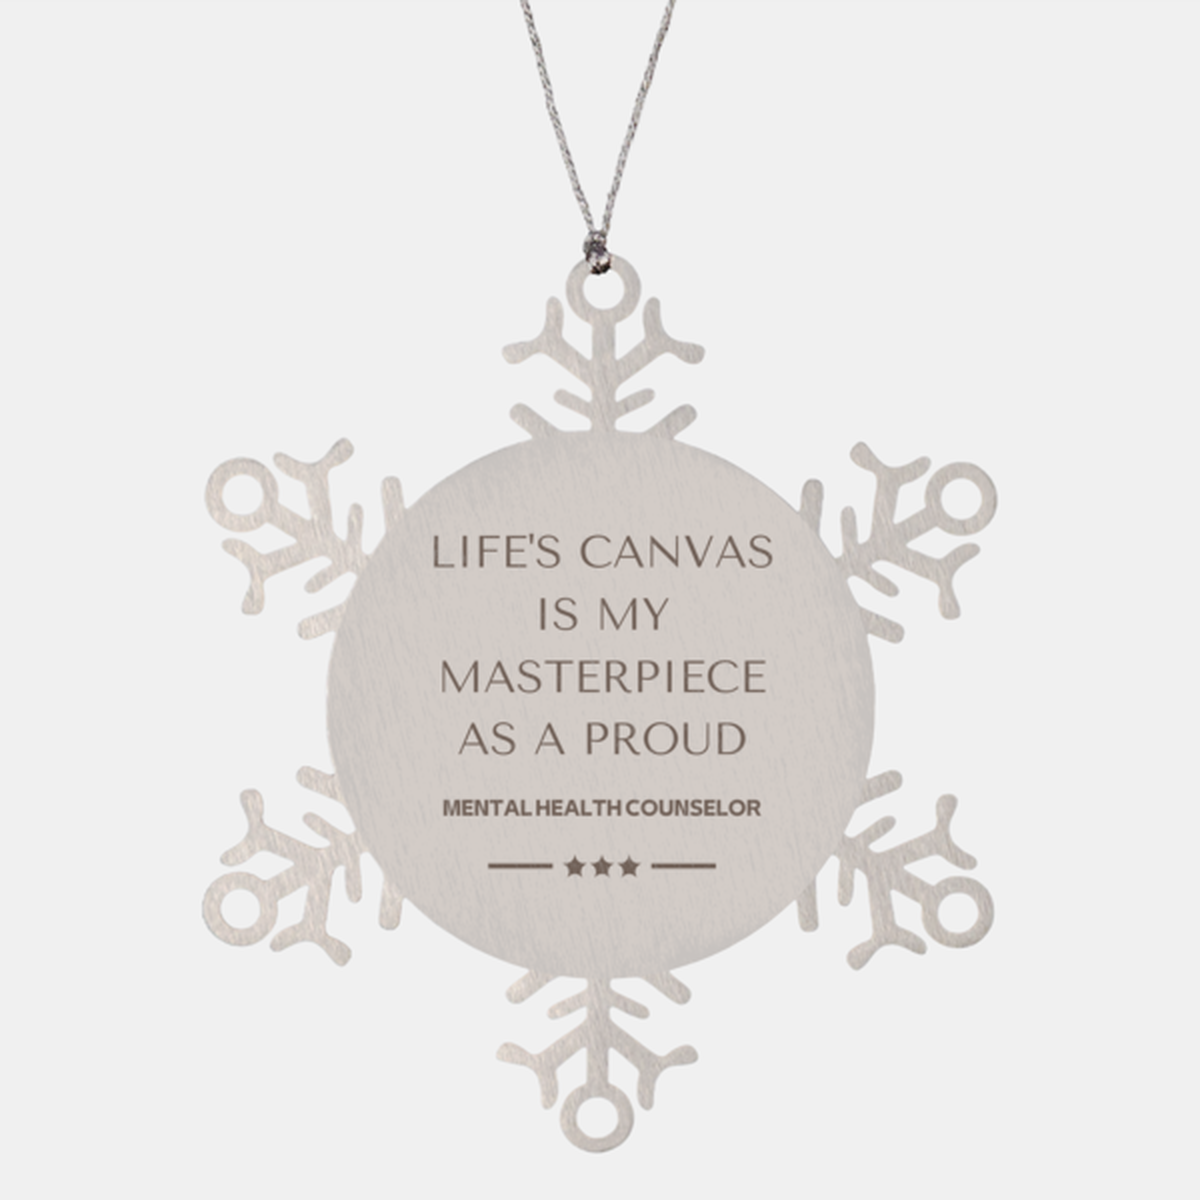 Proud Mental Health Counselor Gifts, Life's canvas is my masterpiece, Epic Birthday Christmas Unique Snowflake Ornament For Mental Health Counselor, Coworkers, Men, Women, Friends